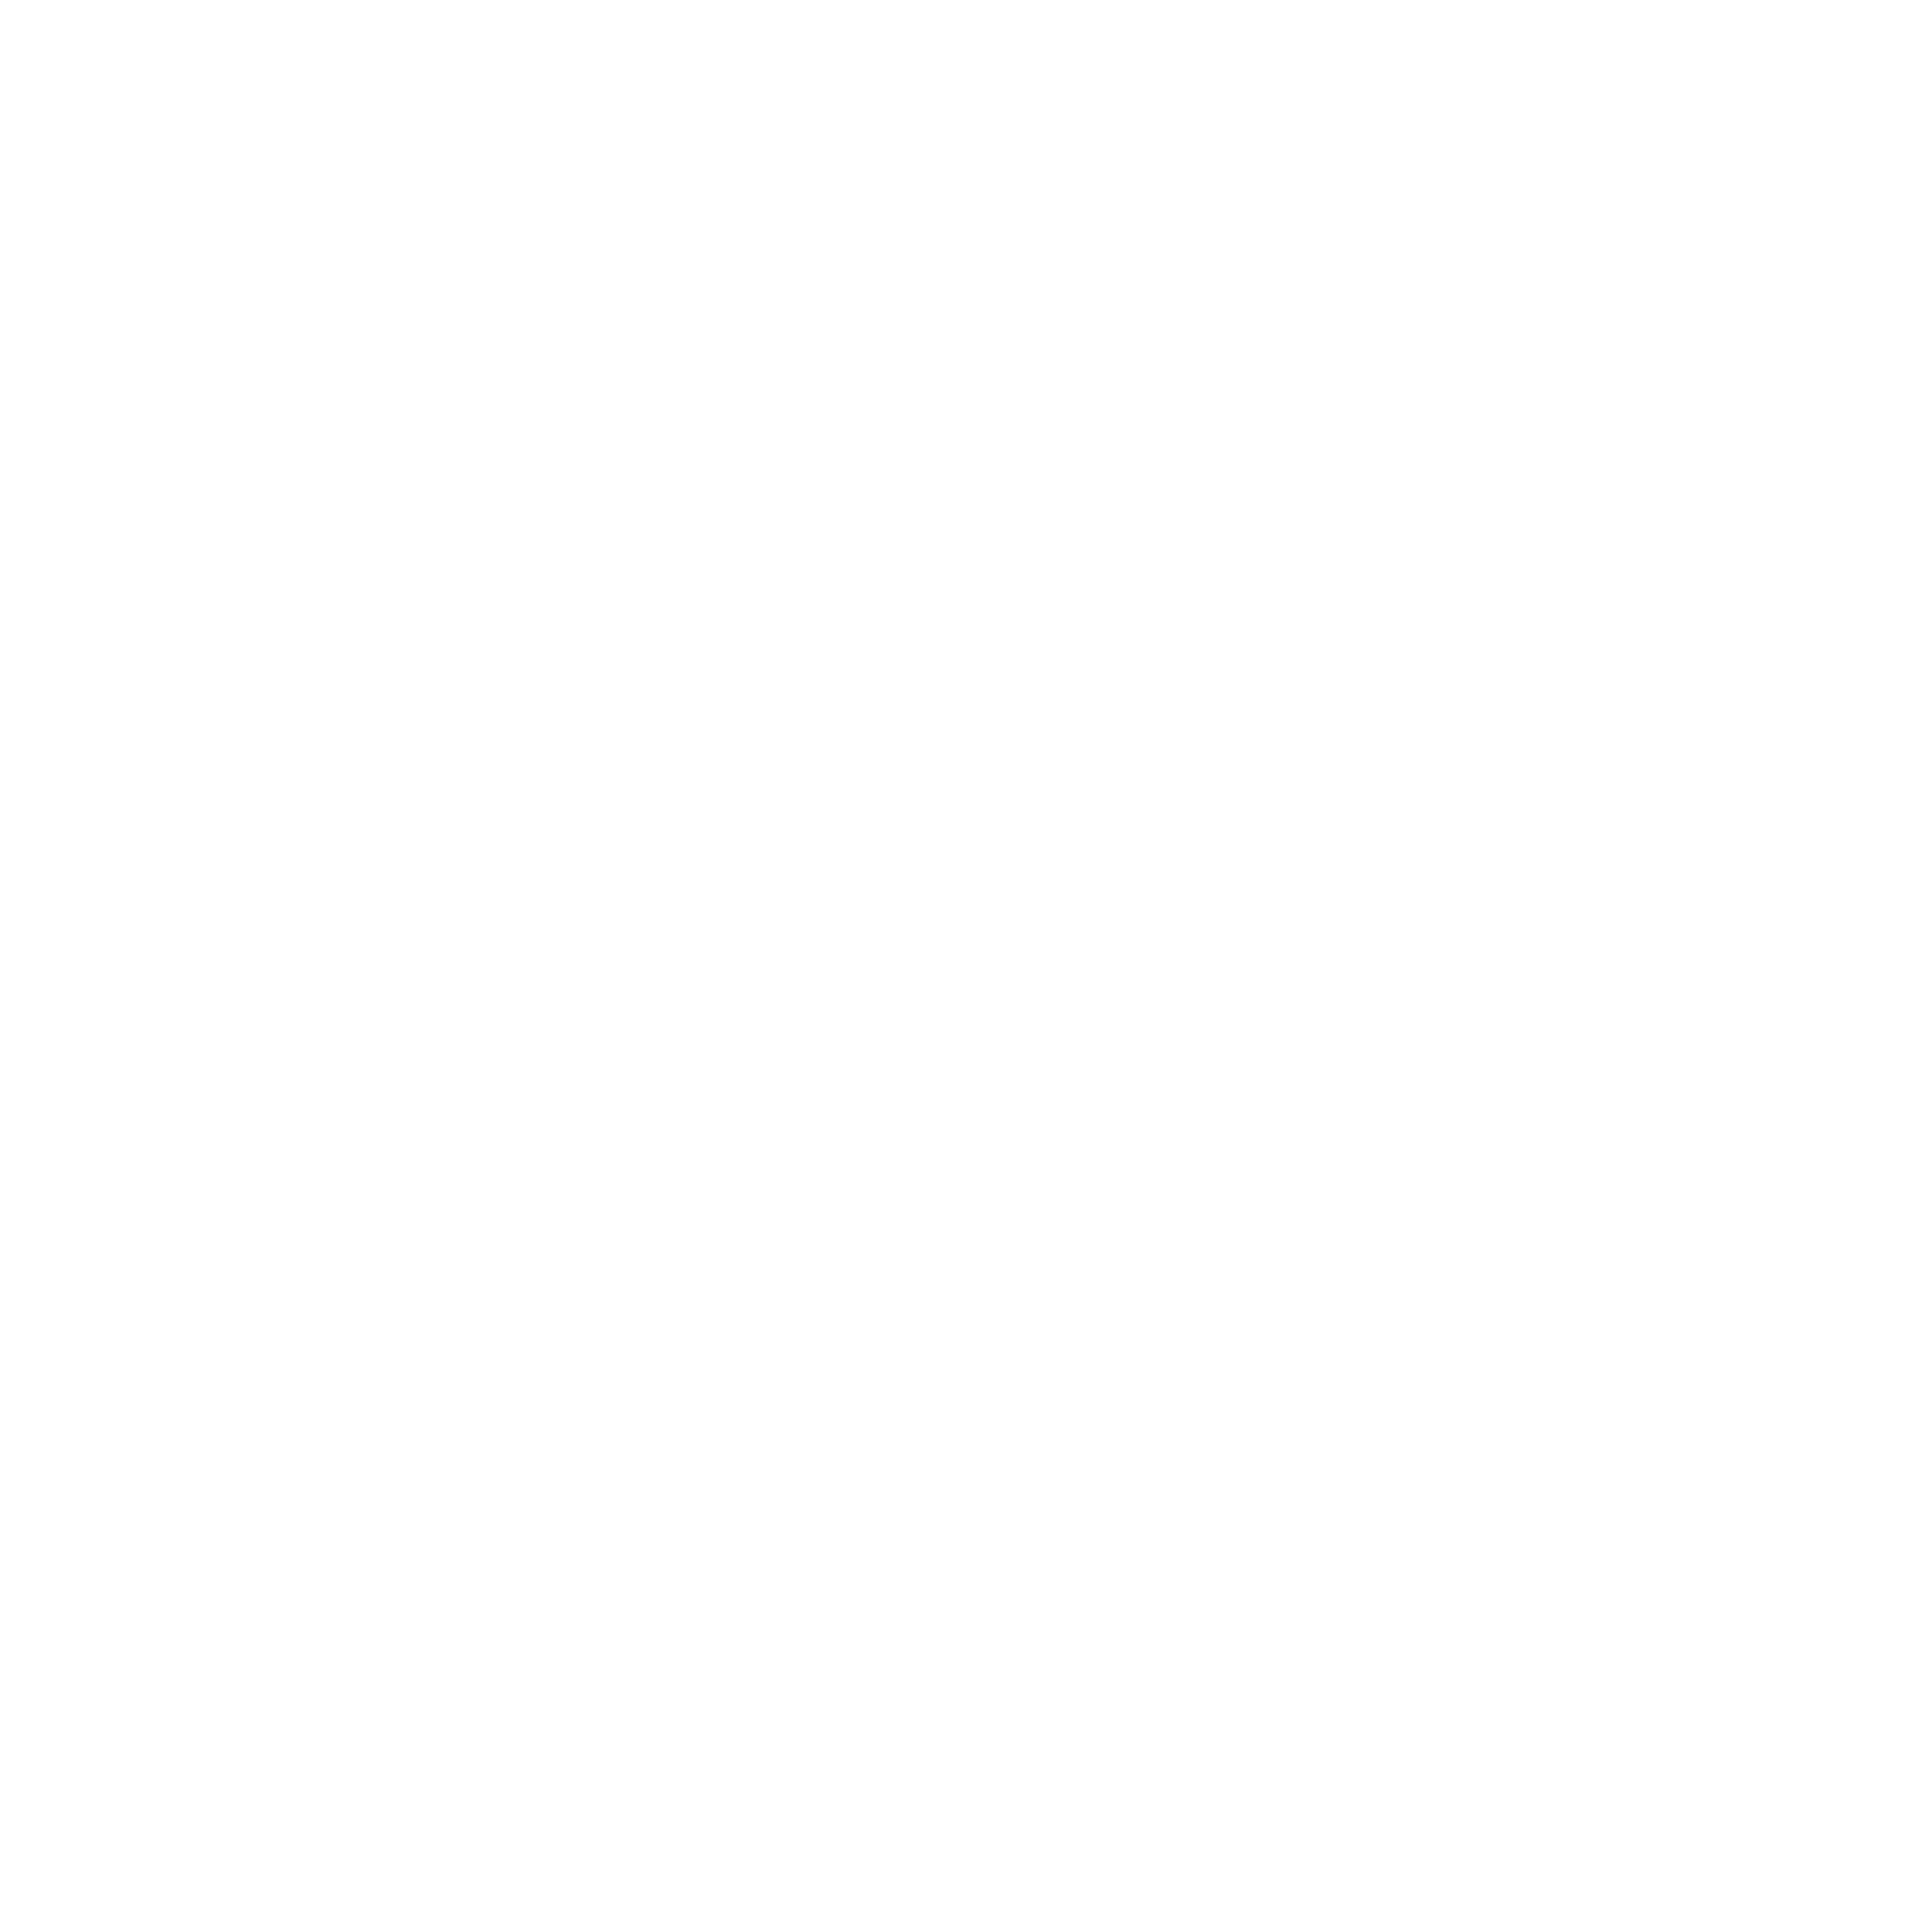 Wizard ink outline.png__PID:6feea437-ed4f-4e4d-b023-815eec6399bf